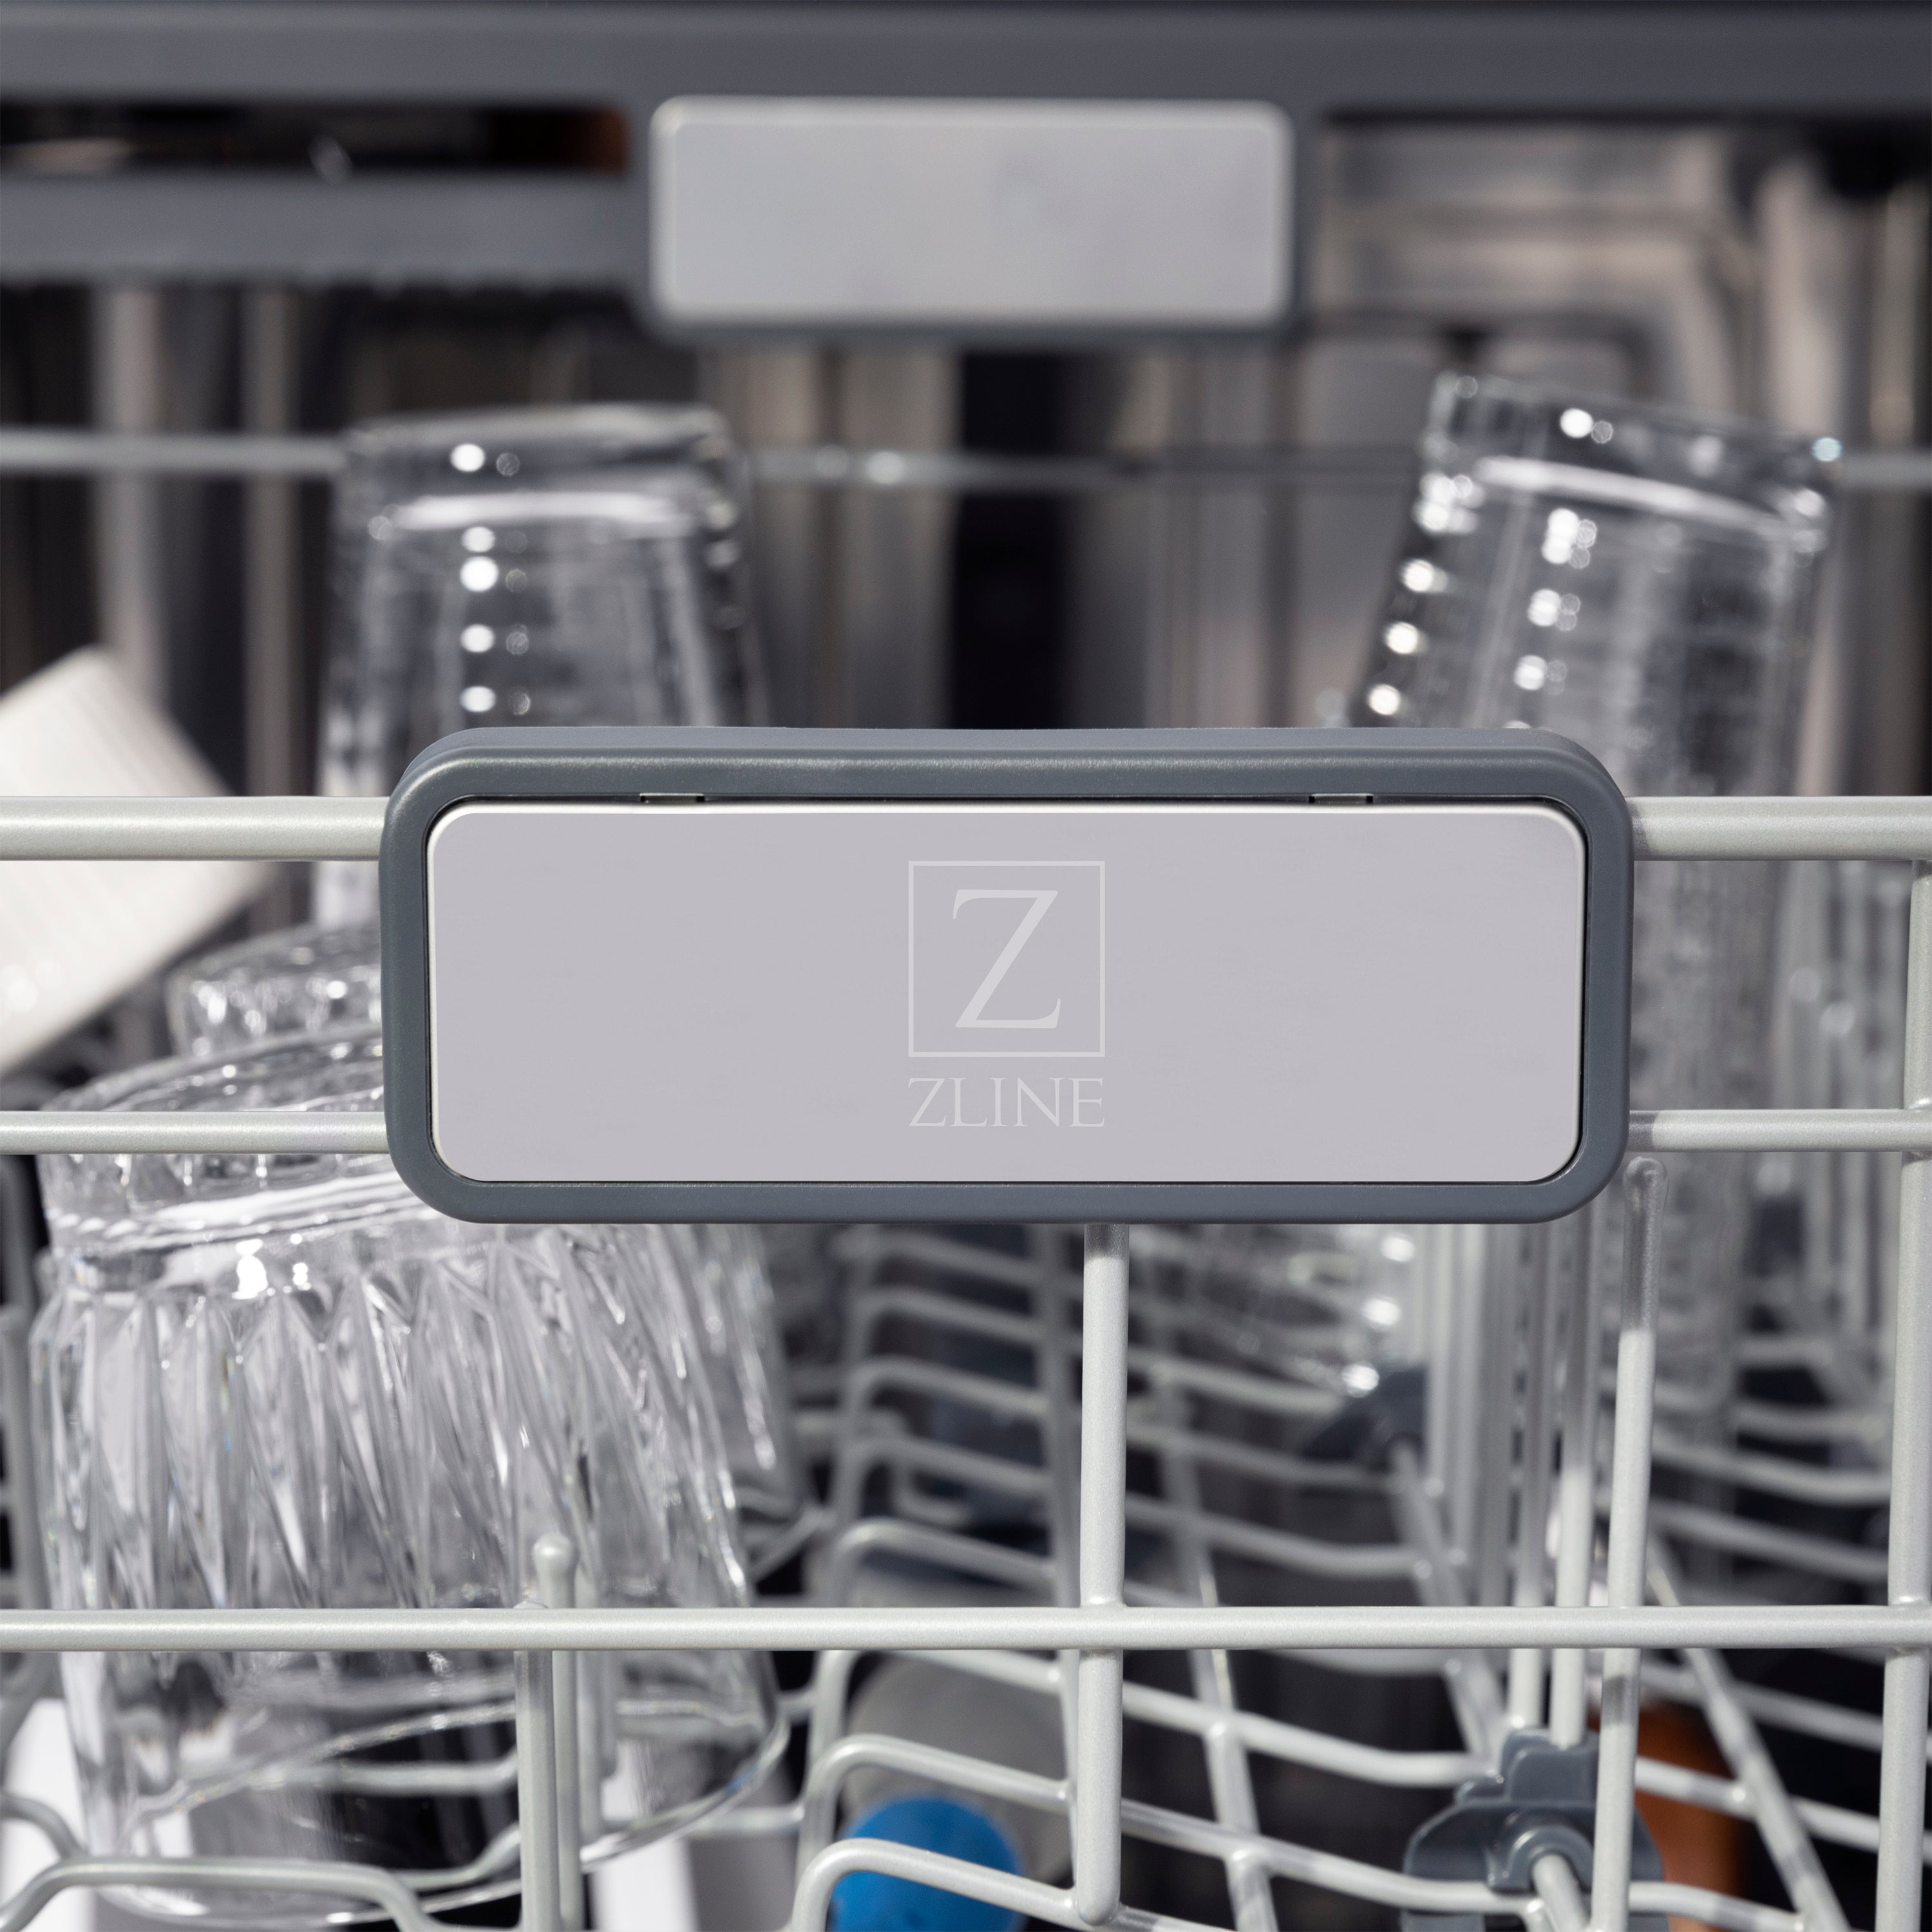 ZLINE Autograph Edition 24" 3rd Rack Top Touch Control Tall Tub Dishwasher in Black Stainless Steel with Gold Handle, 45dBa (DWMTZ-BS-24-G)